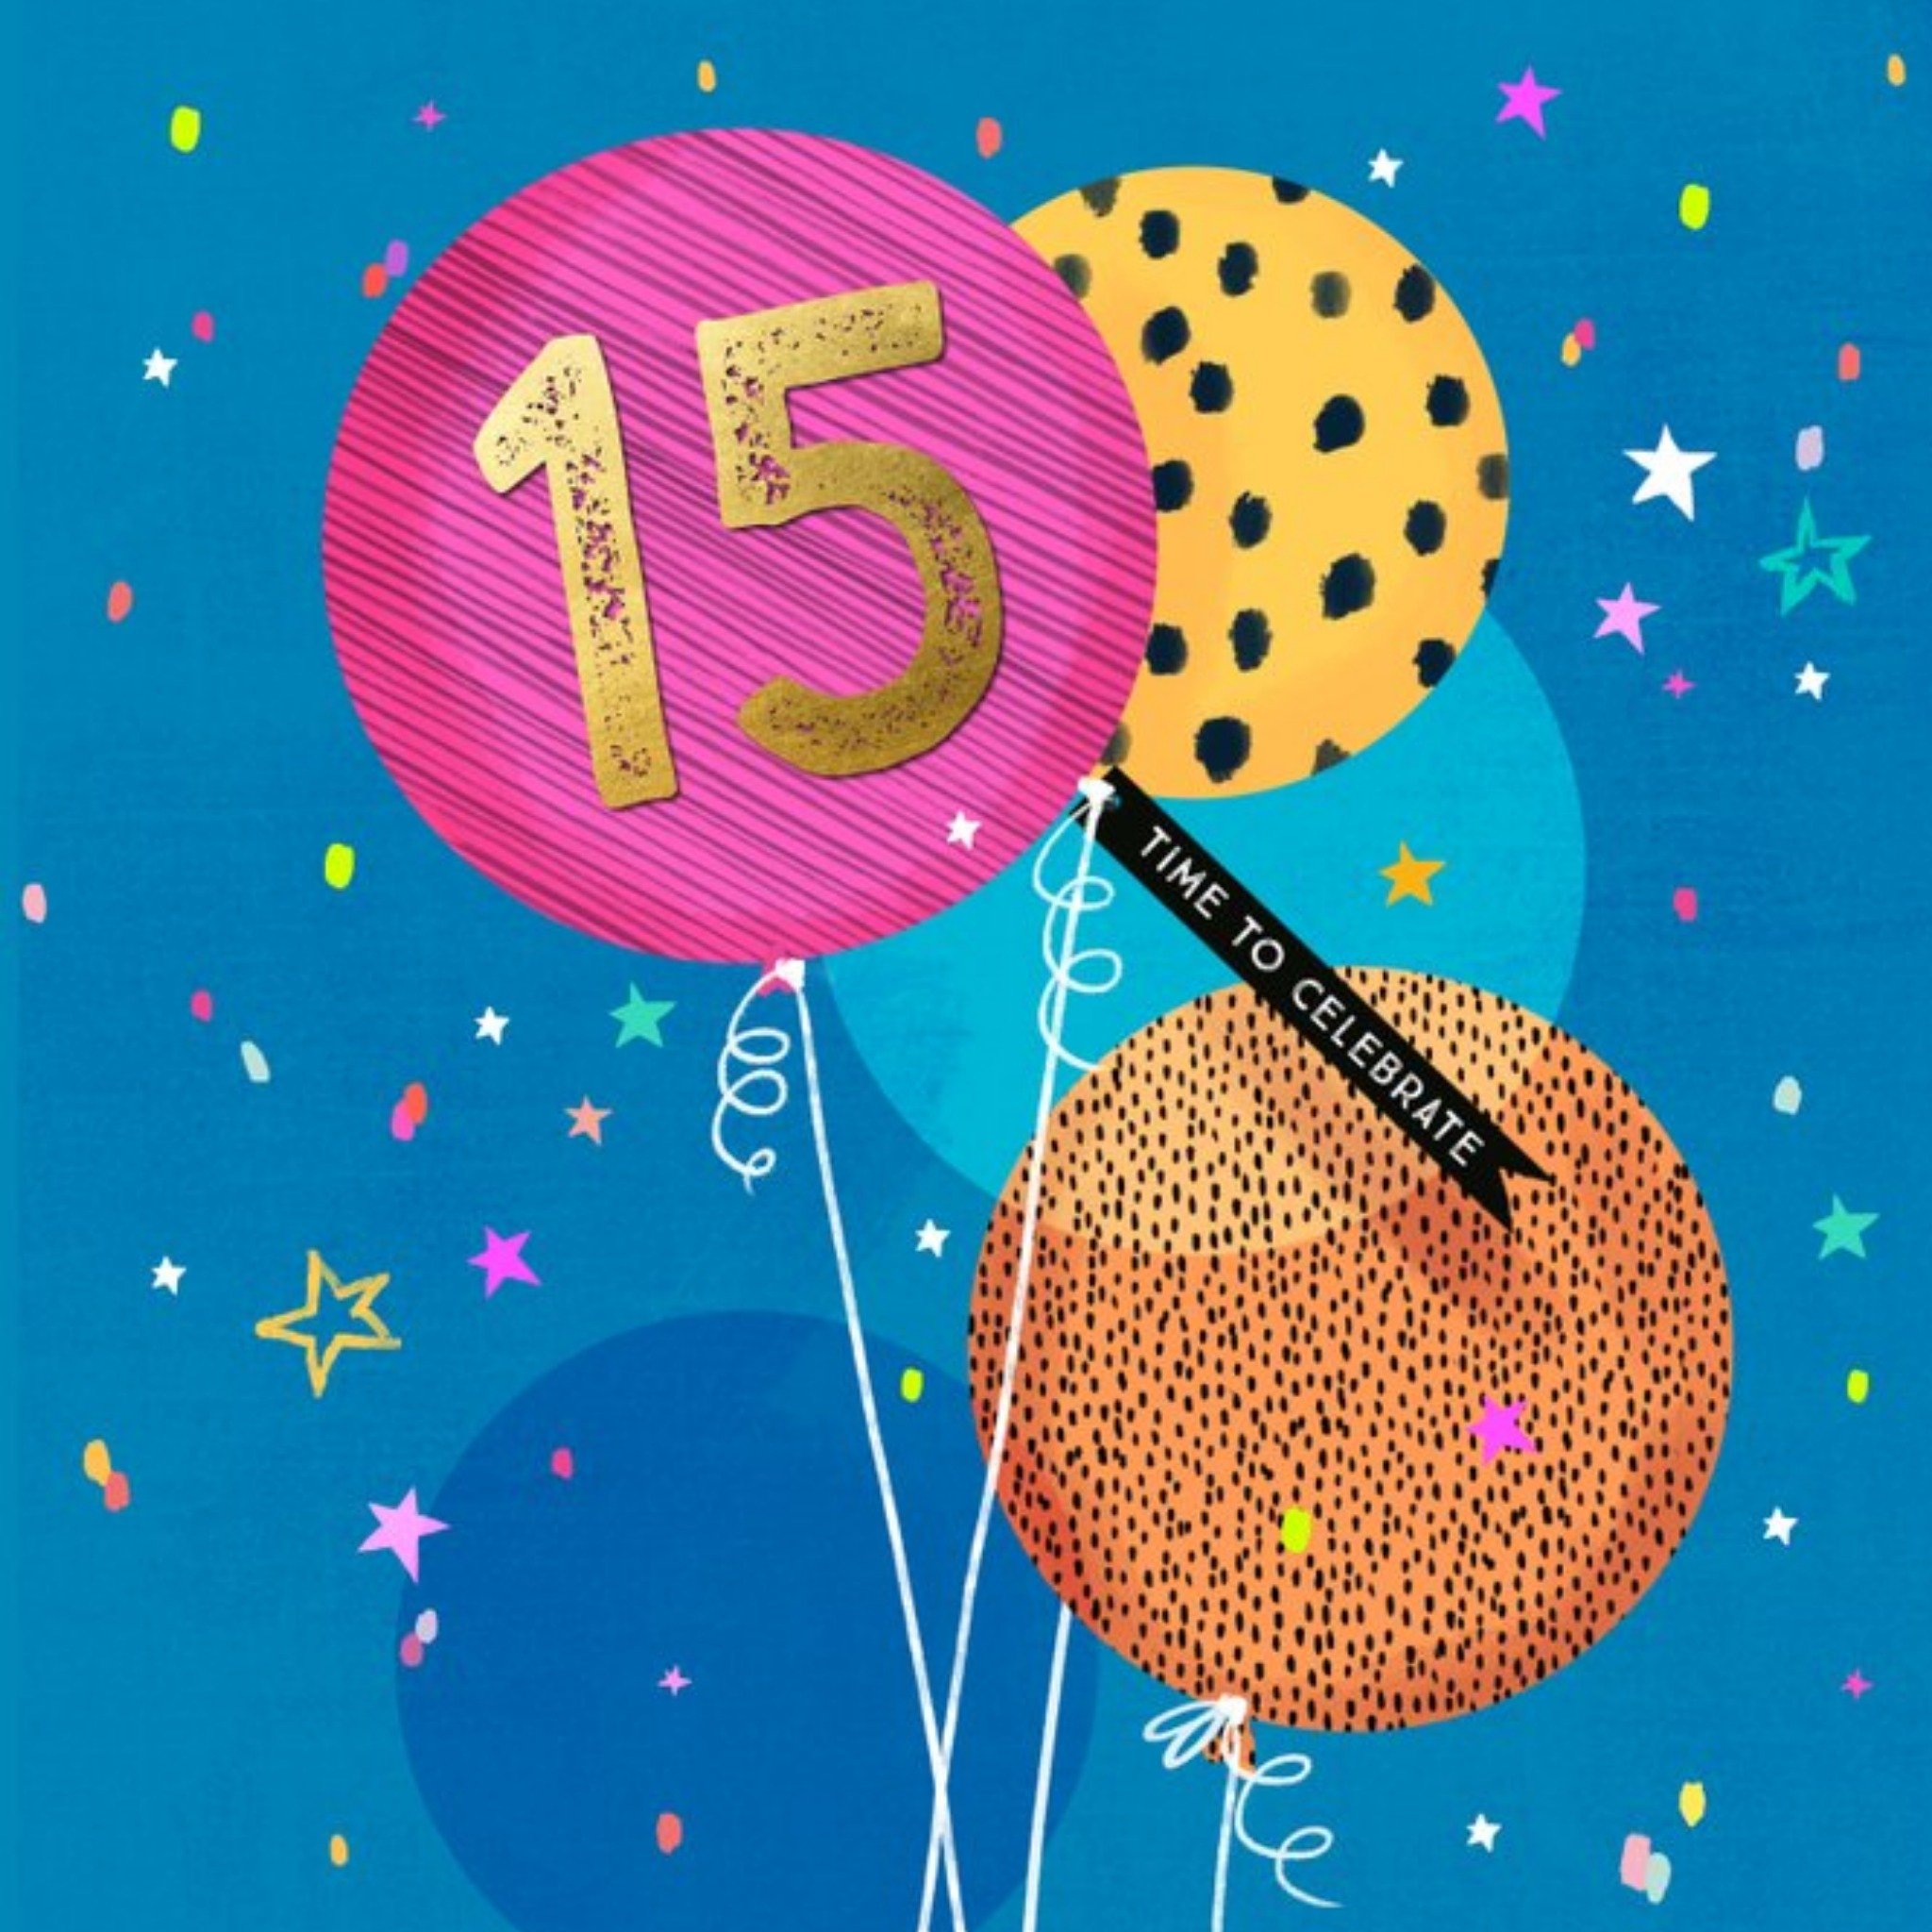 Moonpig Modern Design Balloons 15 Today Time To Celebrate Birthday Card, Large